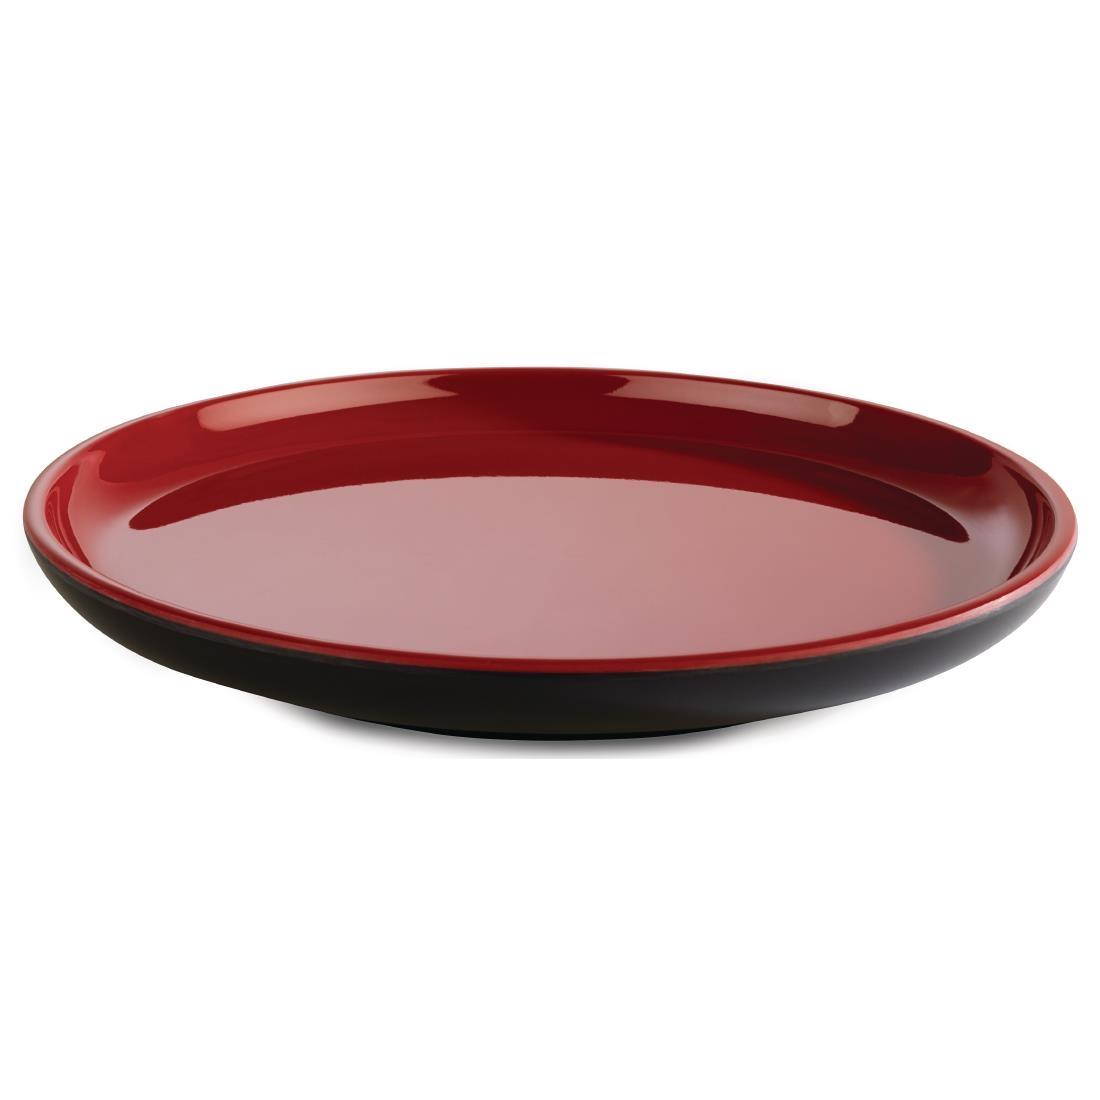 APS Asia+ Plate Red 280mm - Each - DW039 - 1